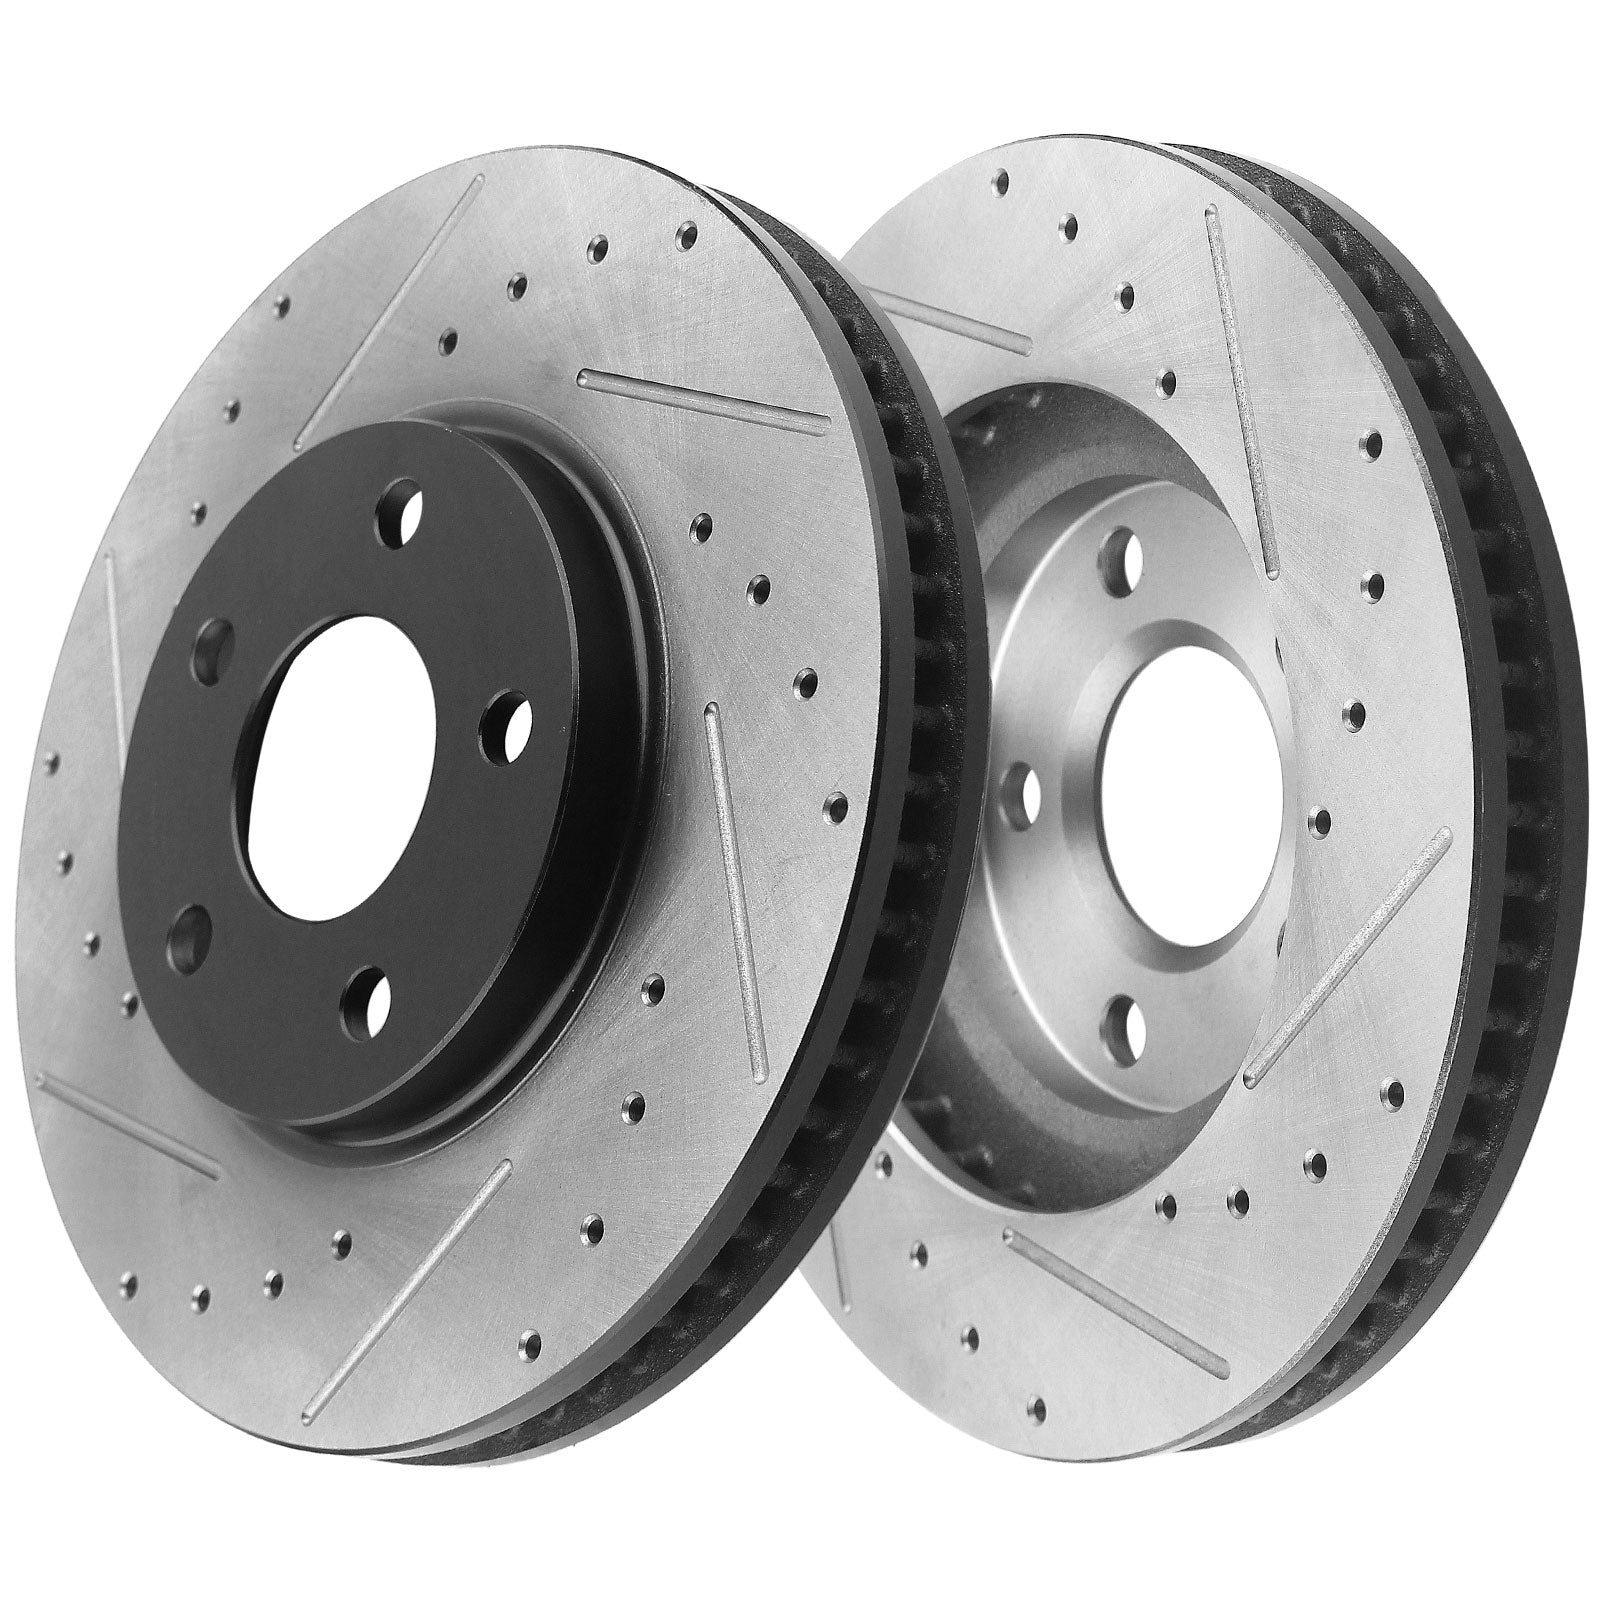 Front Drilled & Slotted Disc Brake Rotors + Ceramic Pads Fits for 1998-2002 Chevy Camaro, 1998-2002 Pontiac Firebird MotorbyMotor